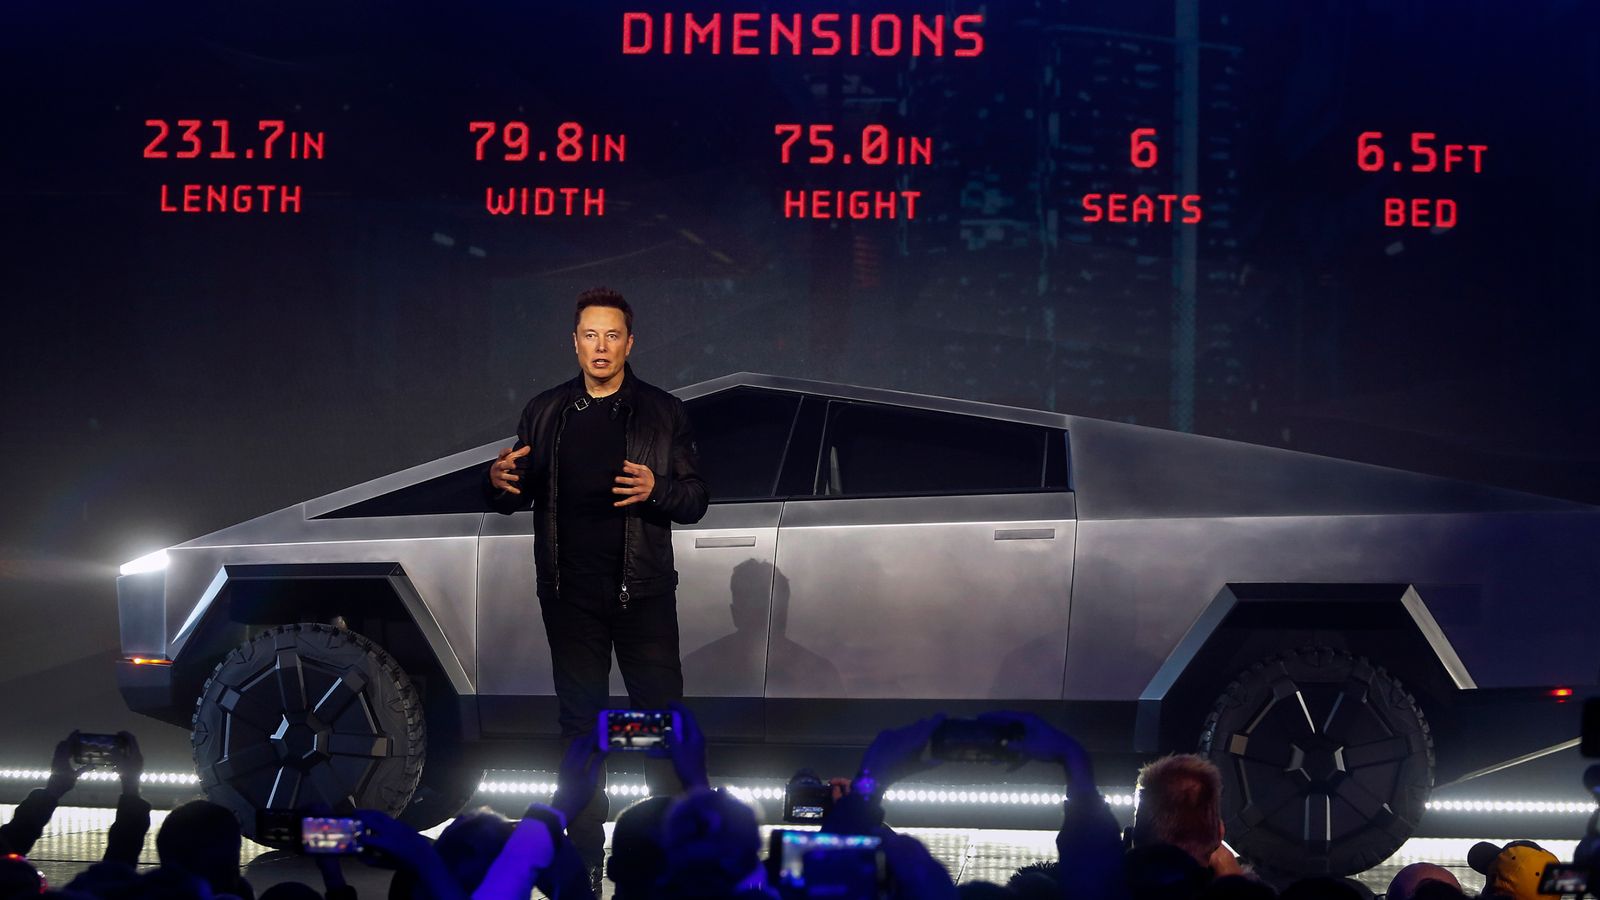 Tesla to cut around 15,000 jobs under Musk drive for 'productivity' - reports